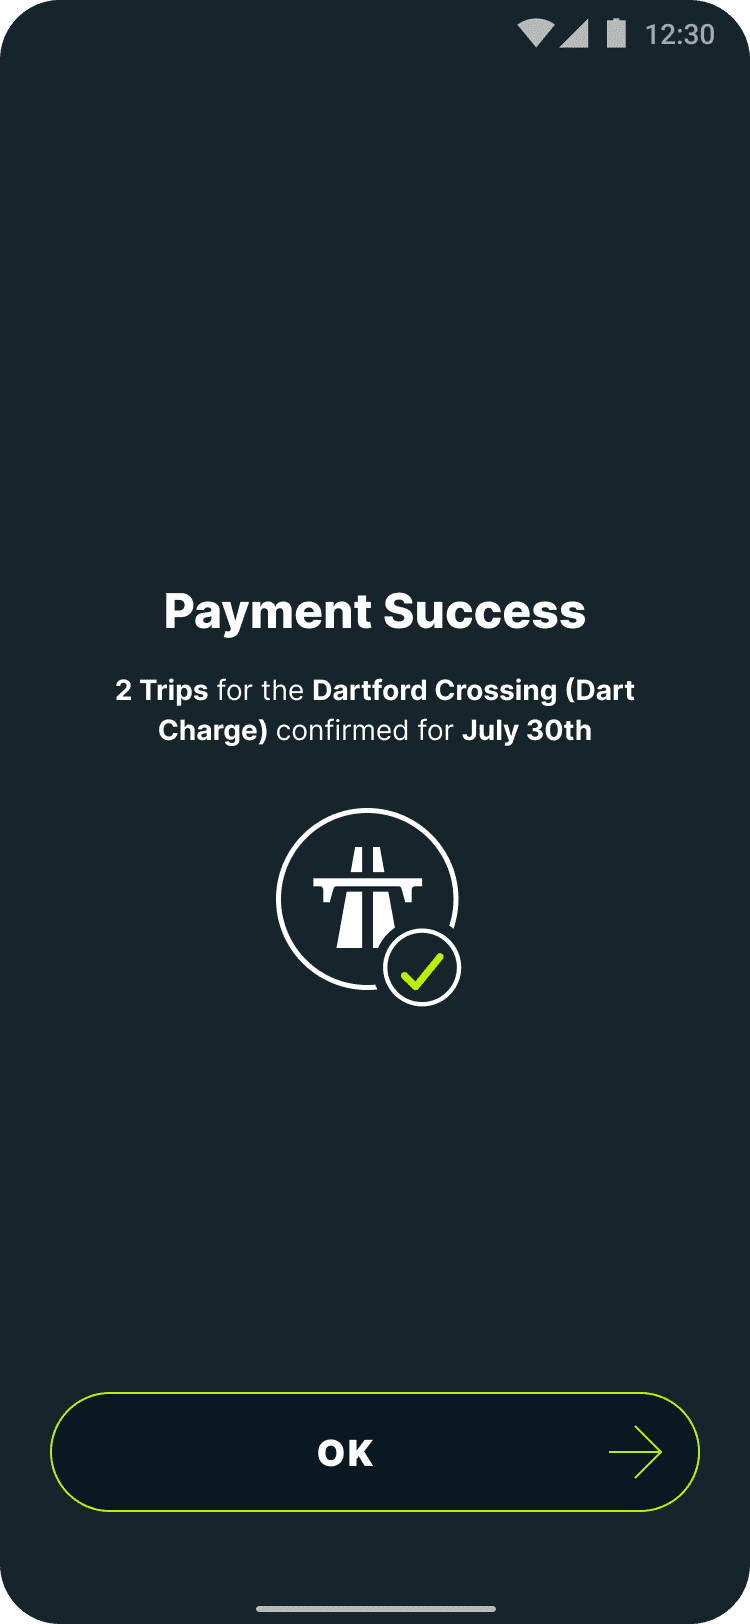 Payment success screen for Dartford Crossing in the Caura app